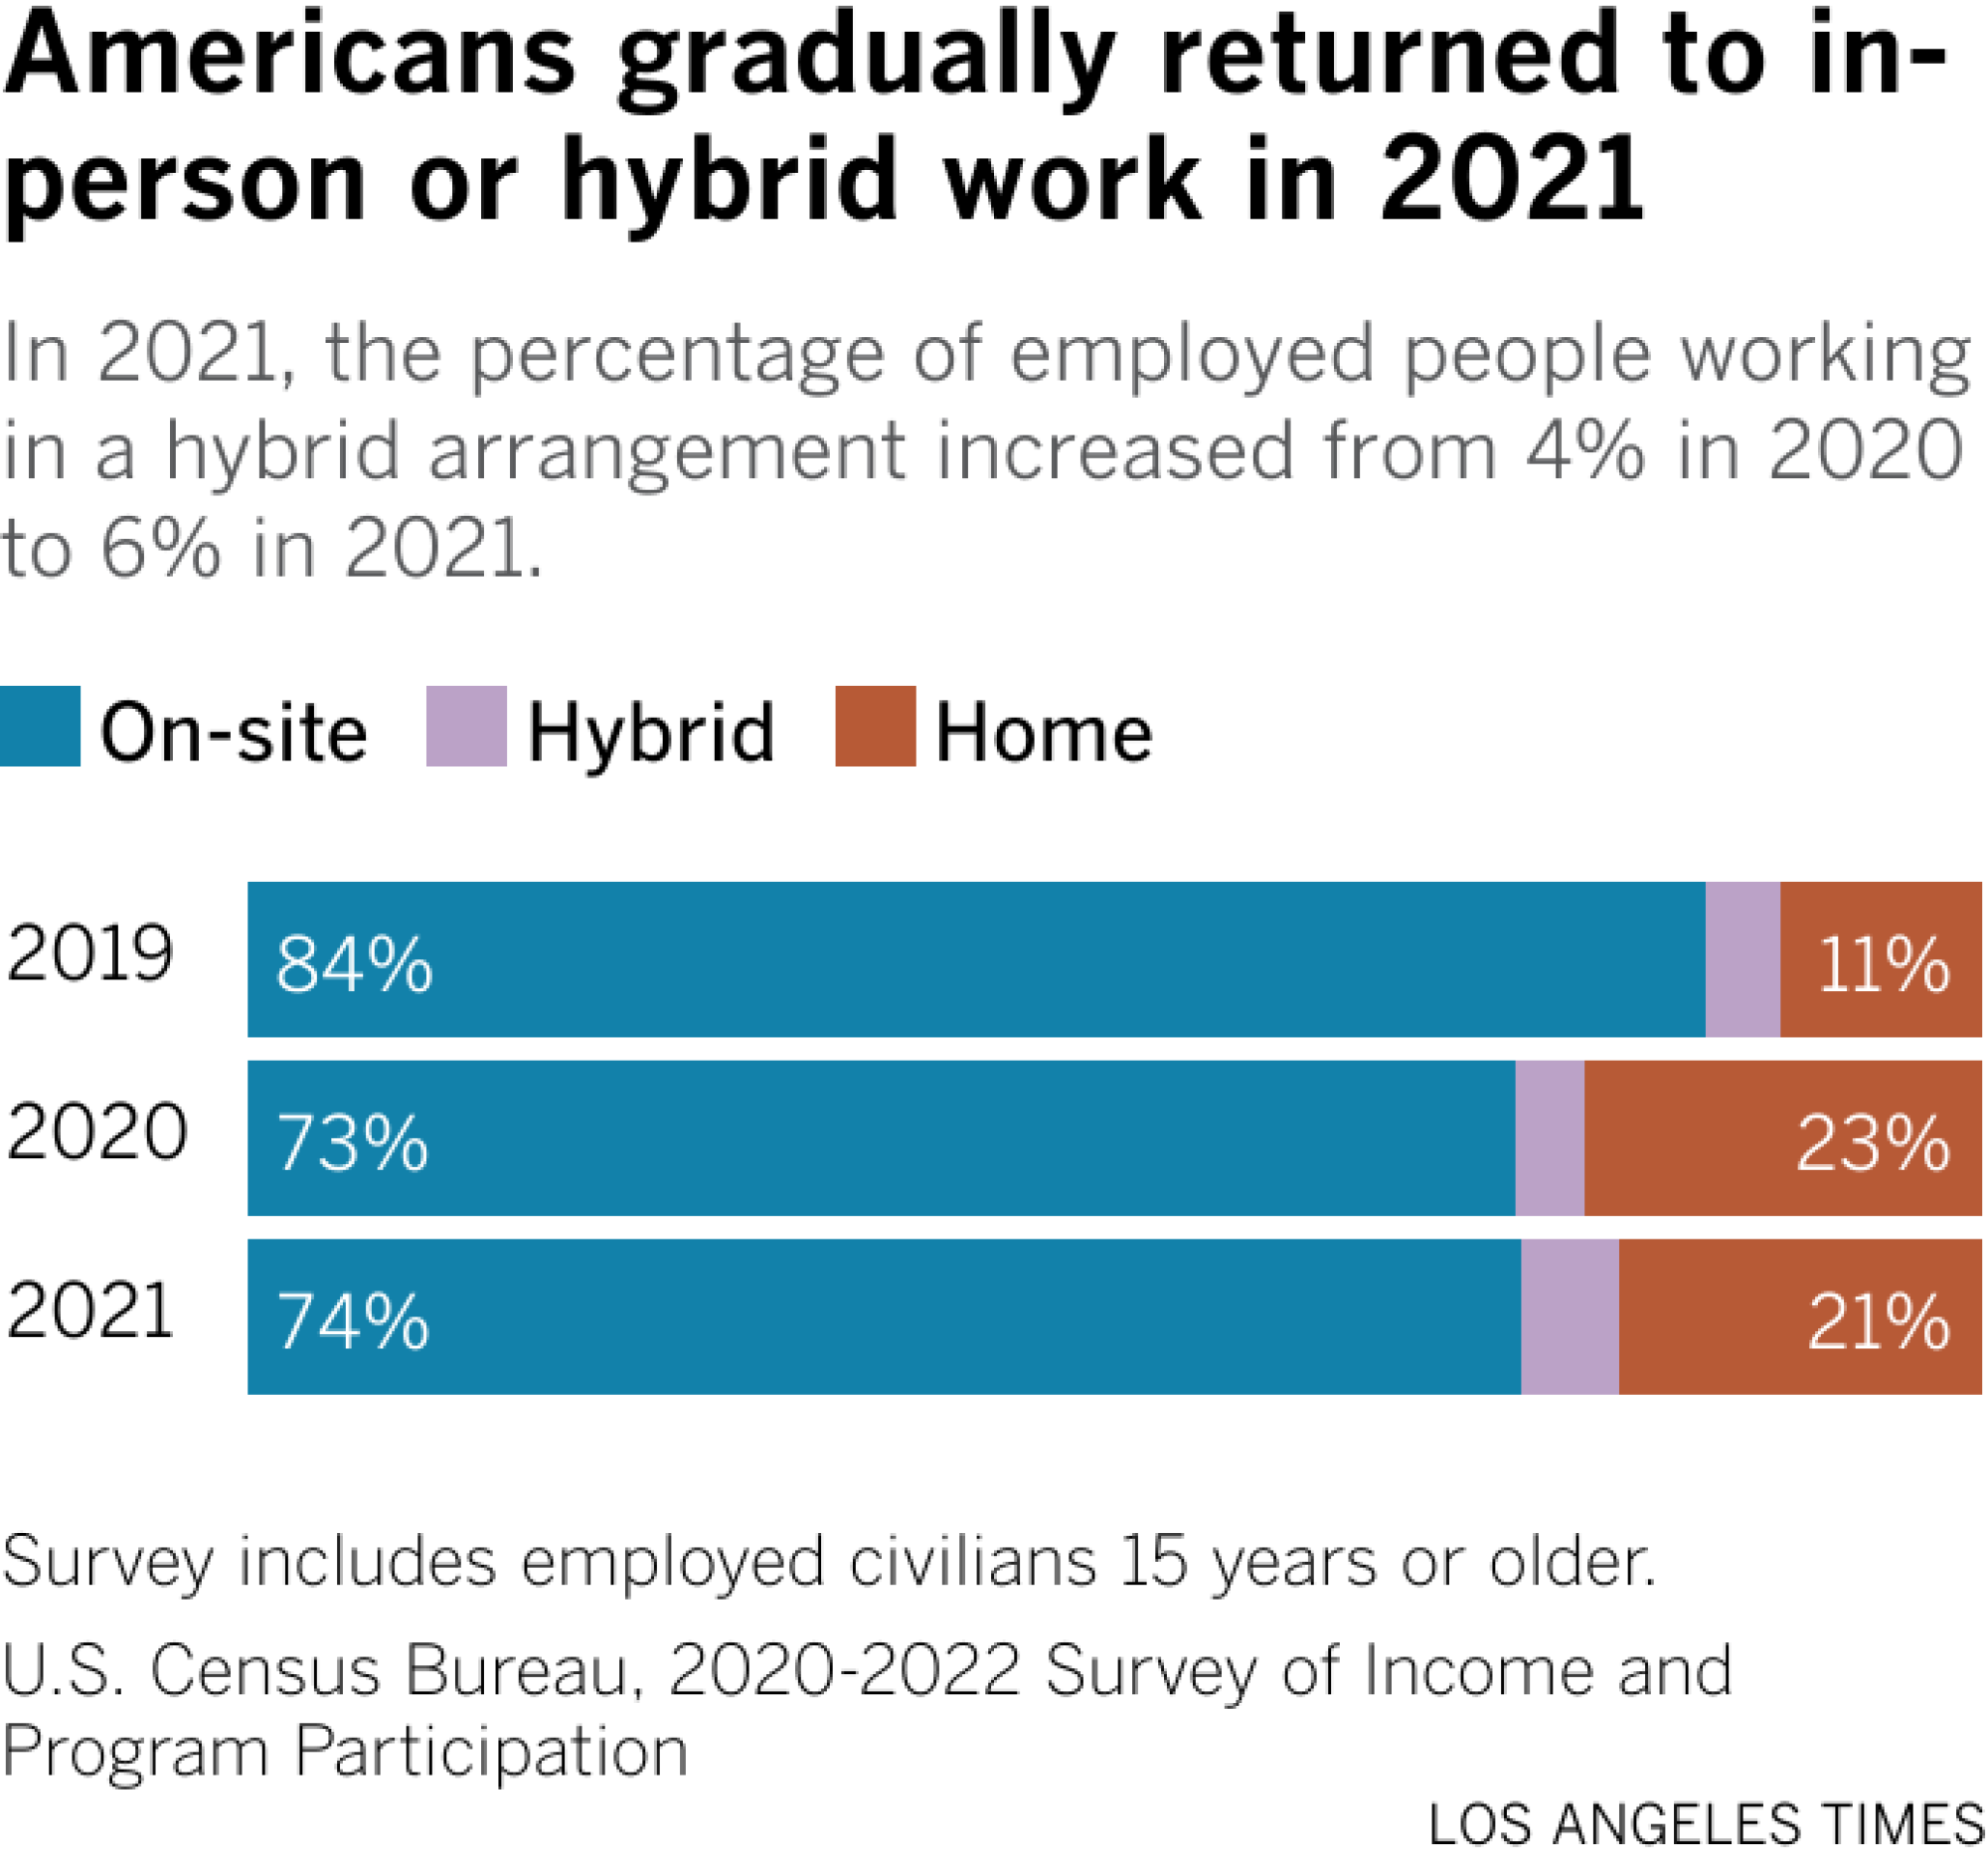 A bar chart shows the distribution of where workers worked in 2019, 2020 and 2021.